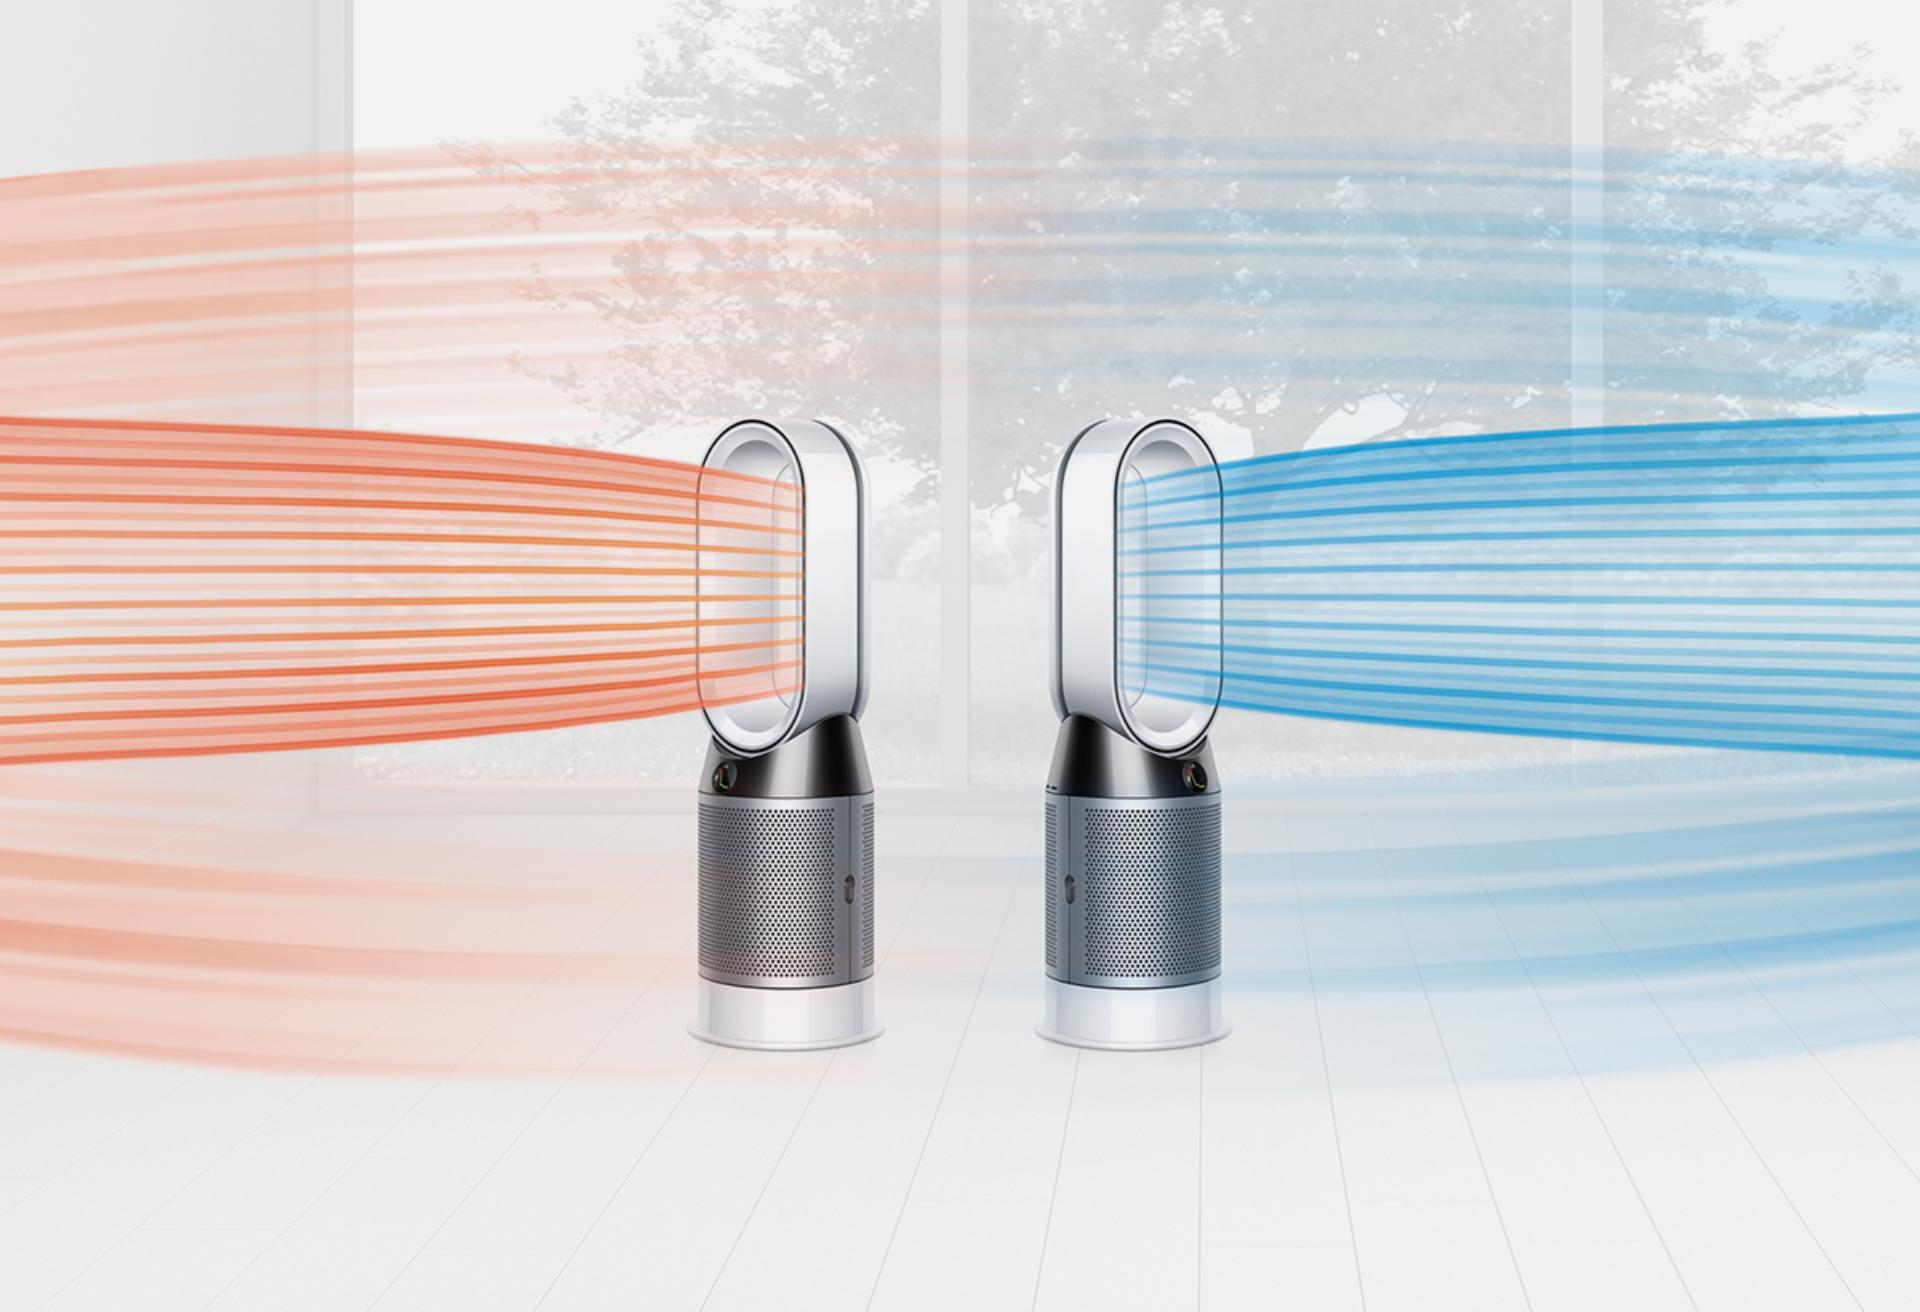 Dyson air purifiers have Air multiplier technology that powerfully projects purified air to all parts of a room